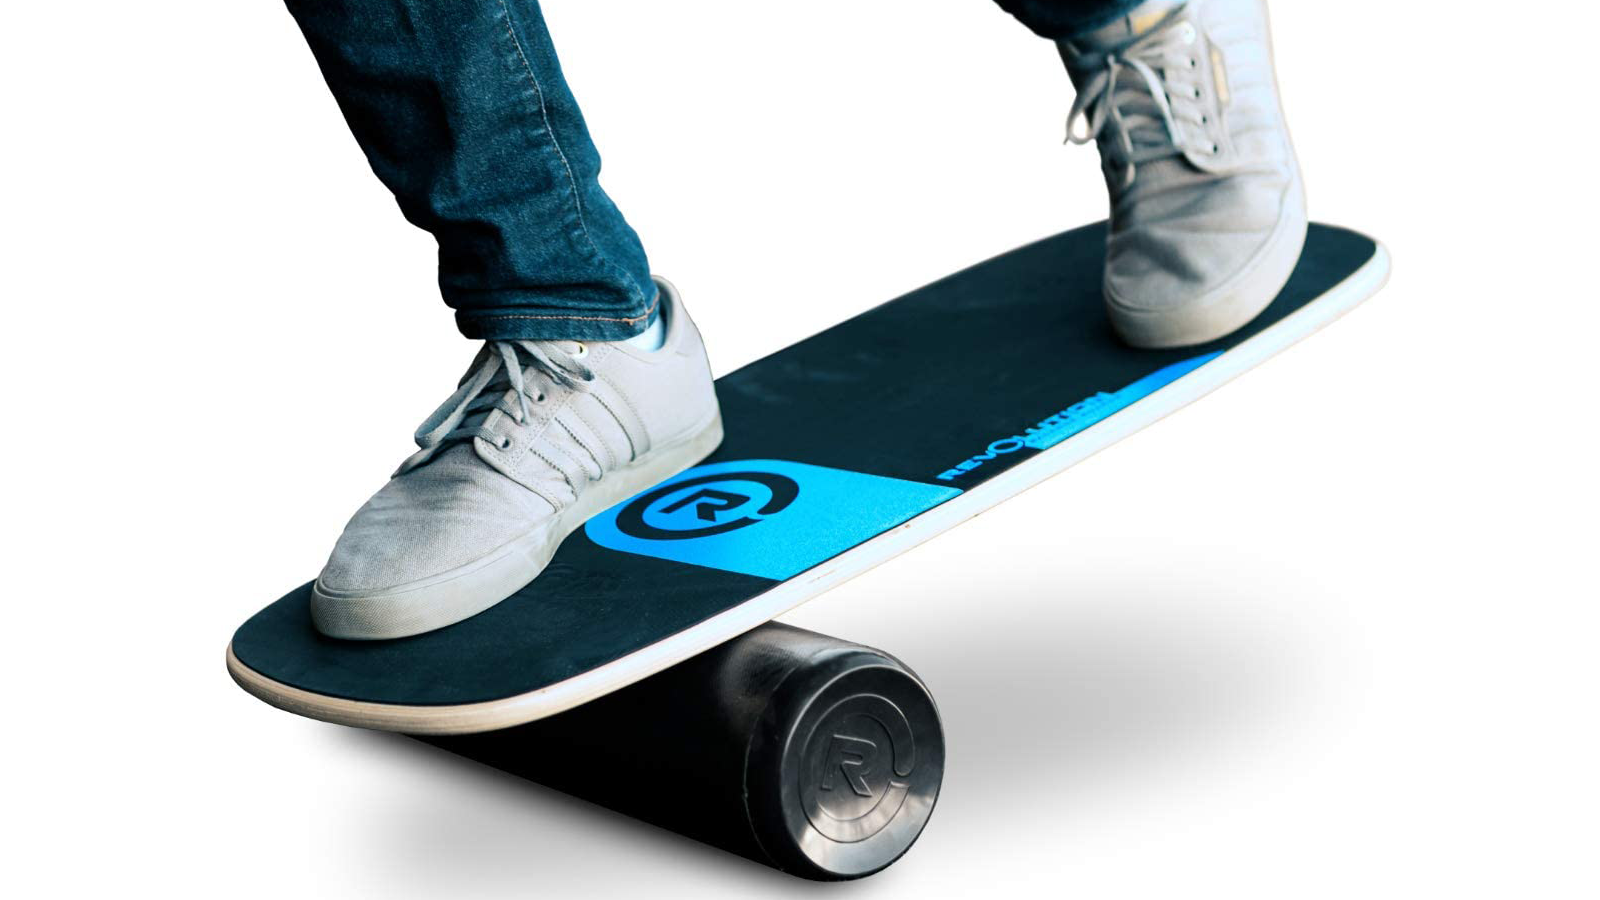 Person balancing on the Revolution 101 board